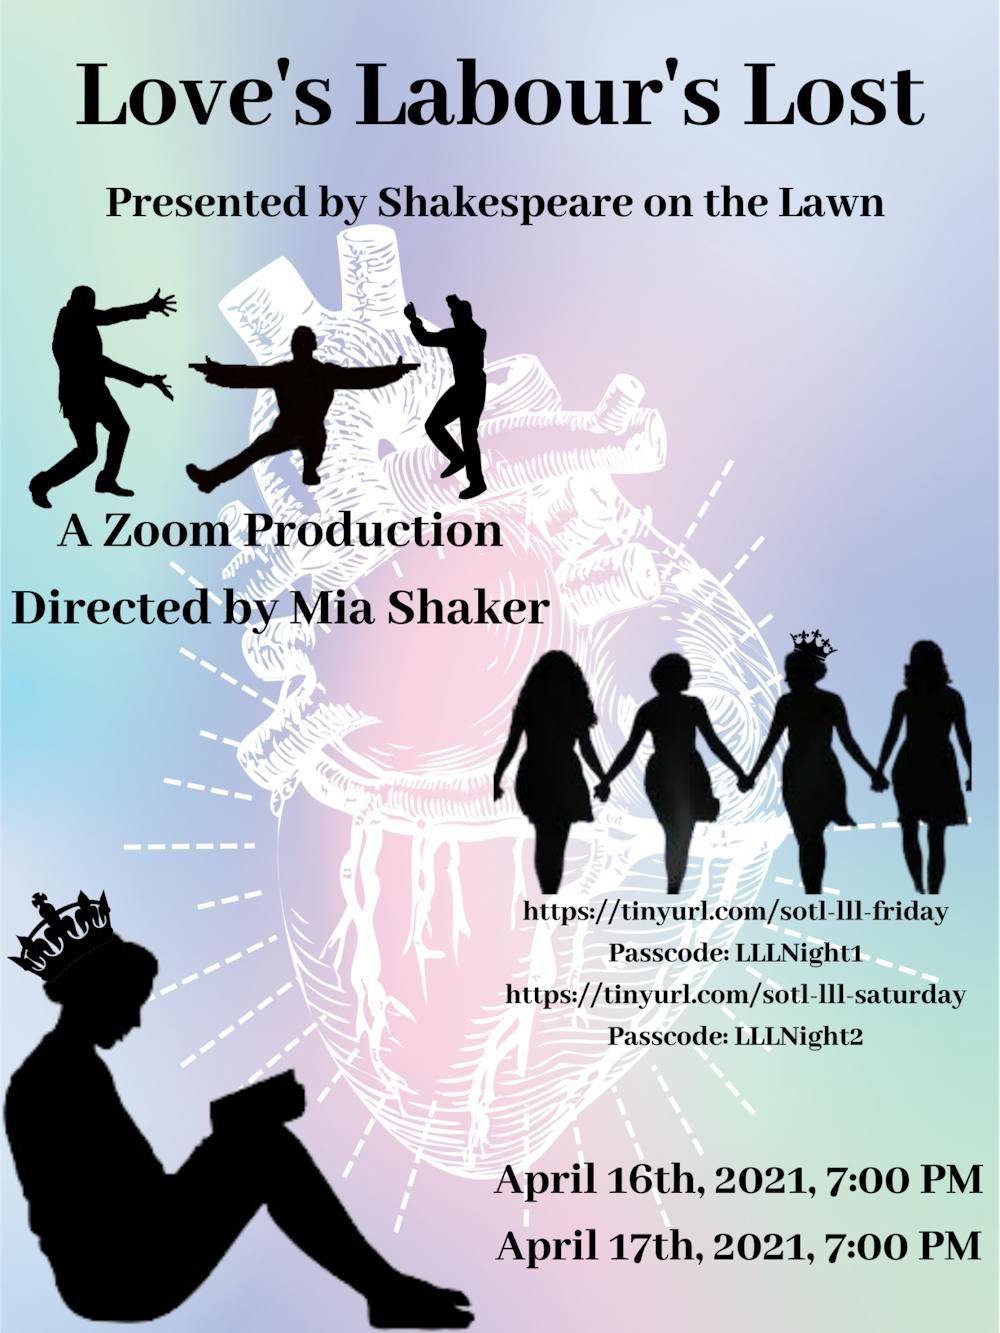 Shakespeare on the Lawn’s production of “Love’s Labour’s Lost” will be presented virtually via Zoom April 16 and 17 at 7 p.m.